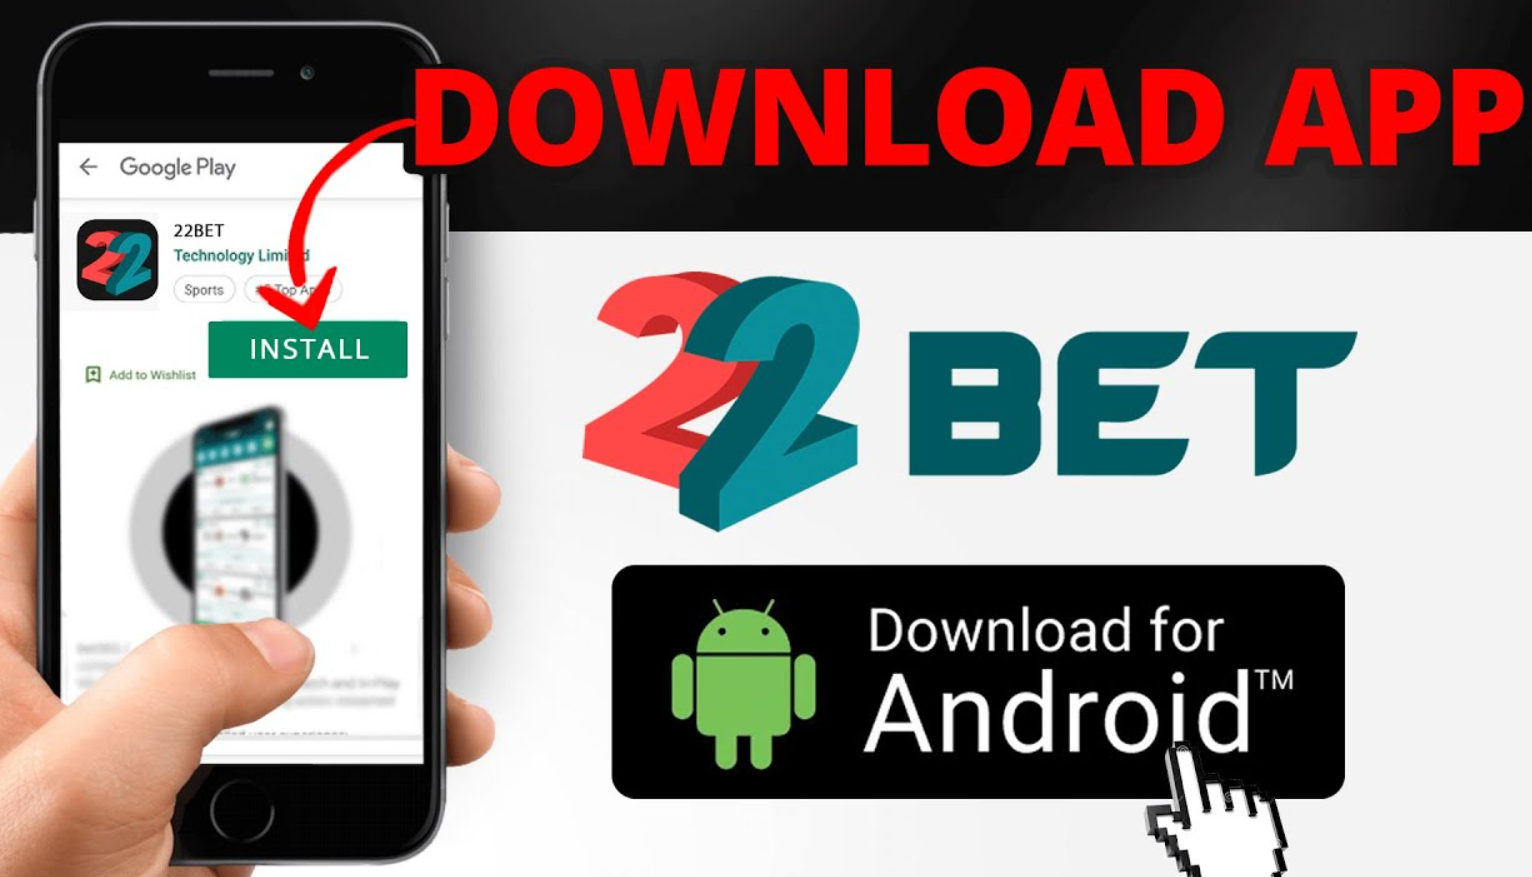 The functionality of the mobile application from the 22Bet brand